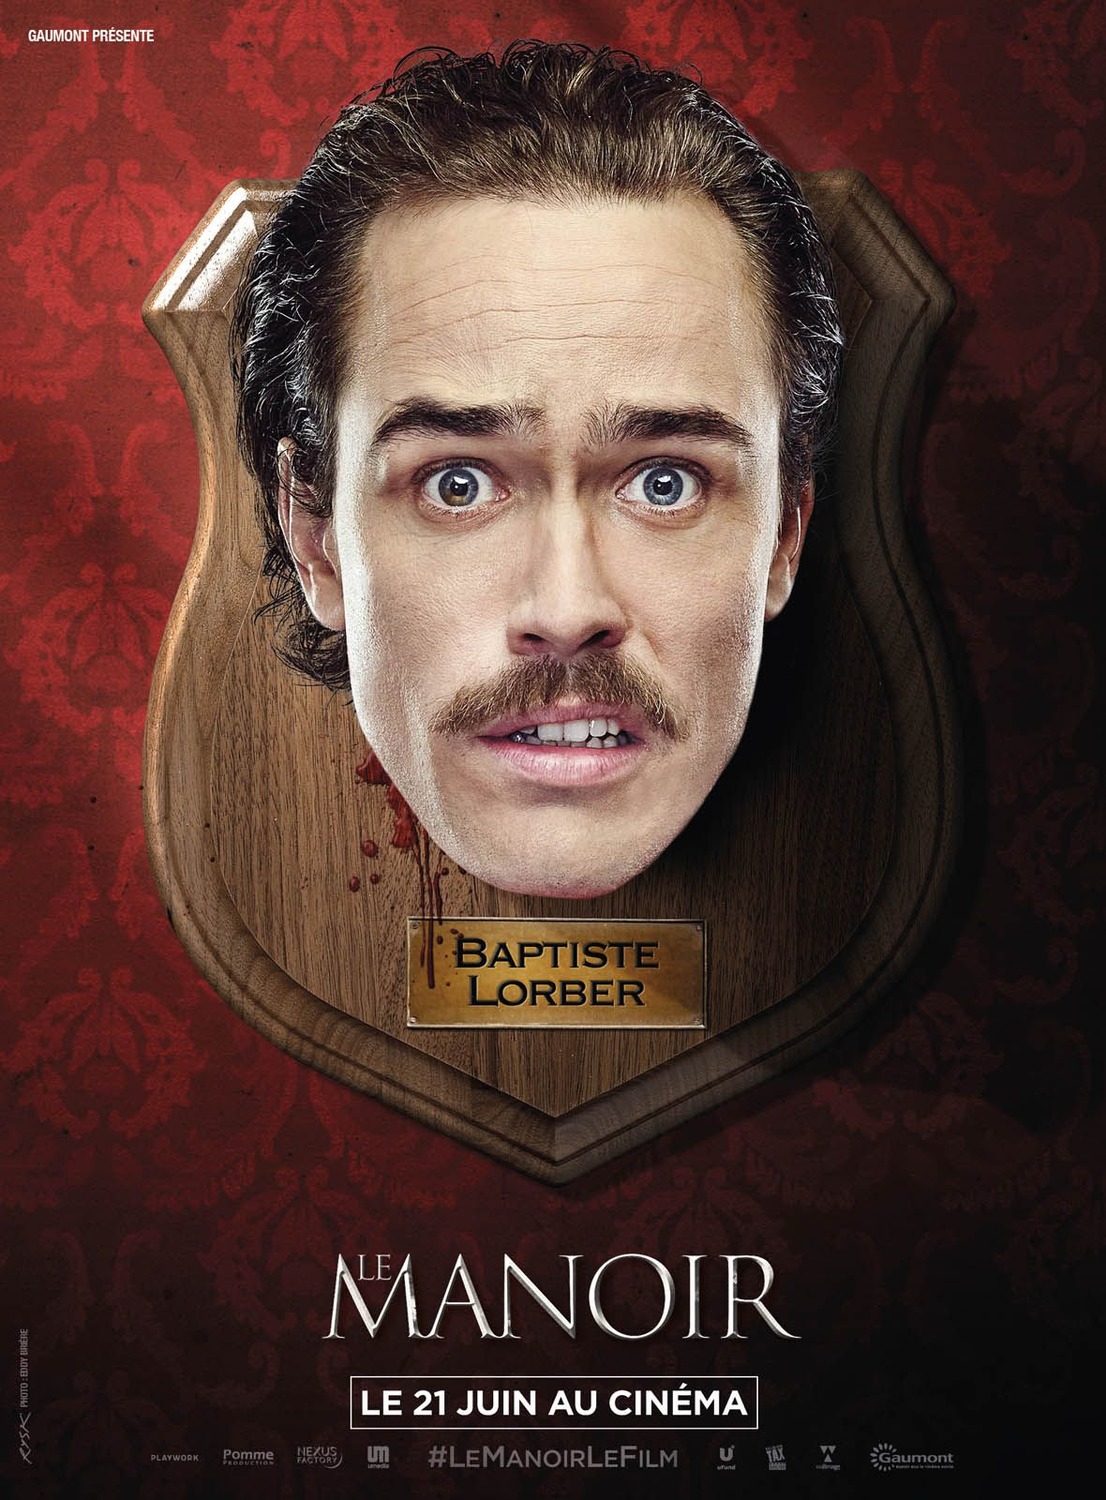 Extra Large Movie Poster Image for Le manoir (#5 of 11)